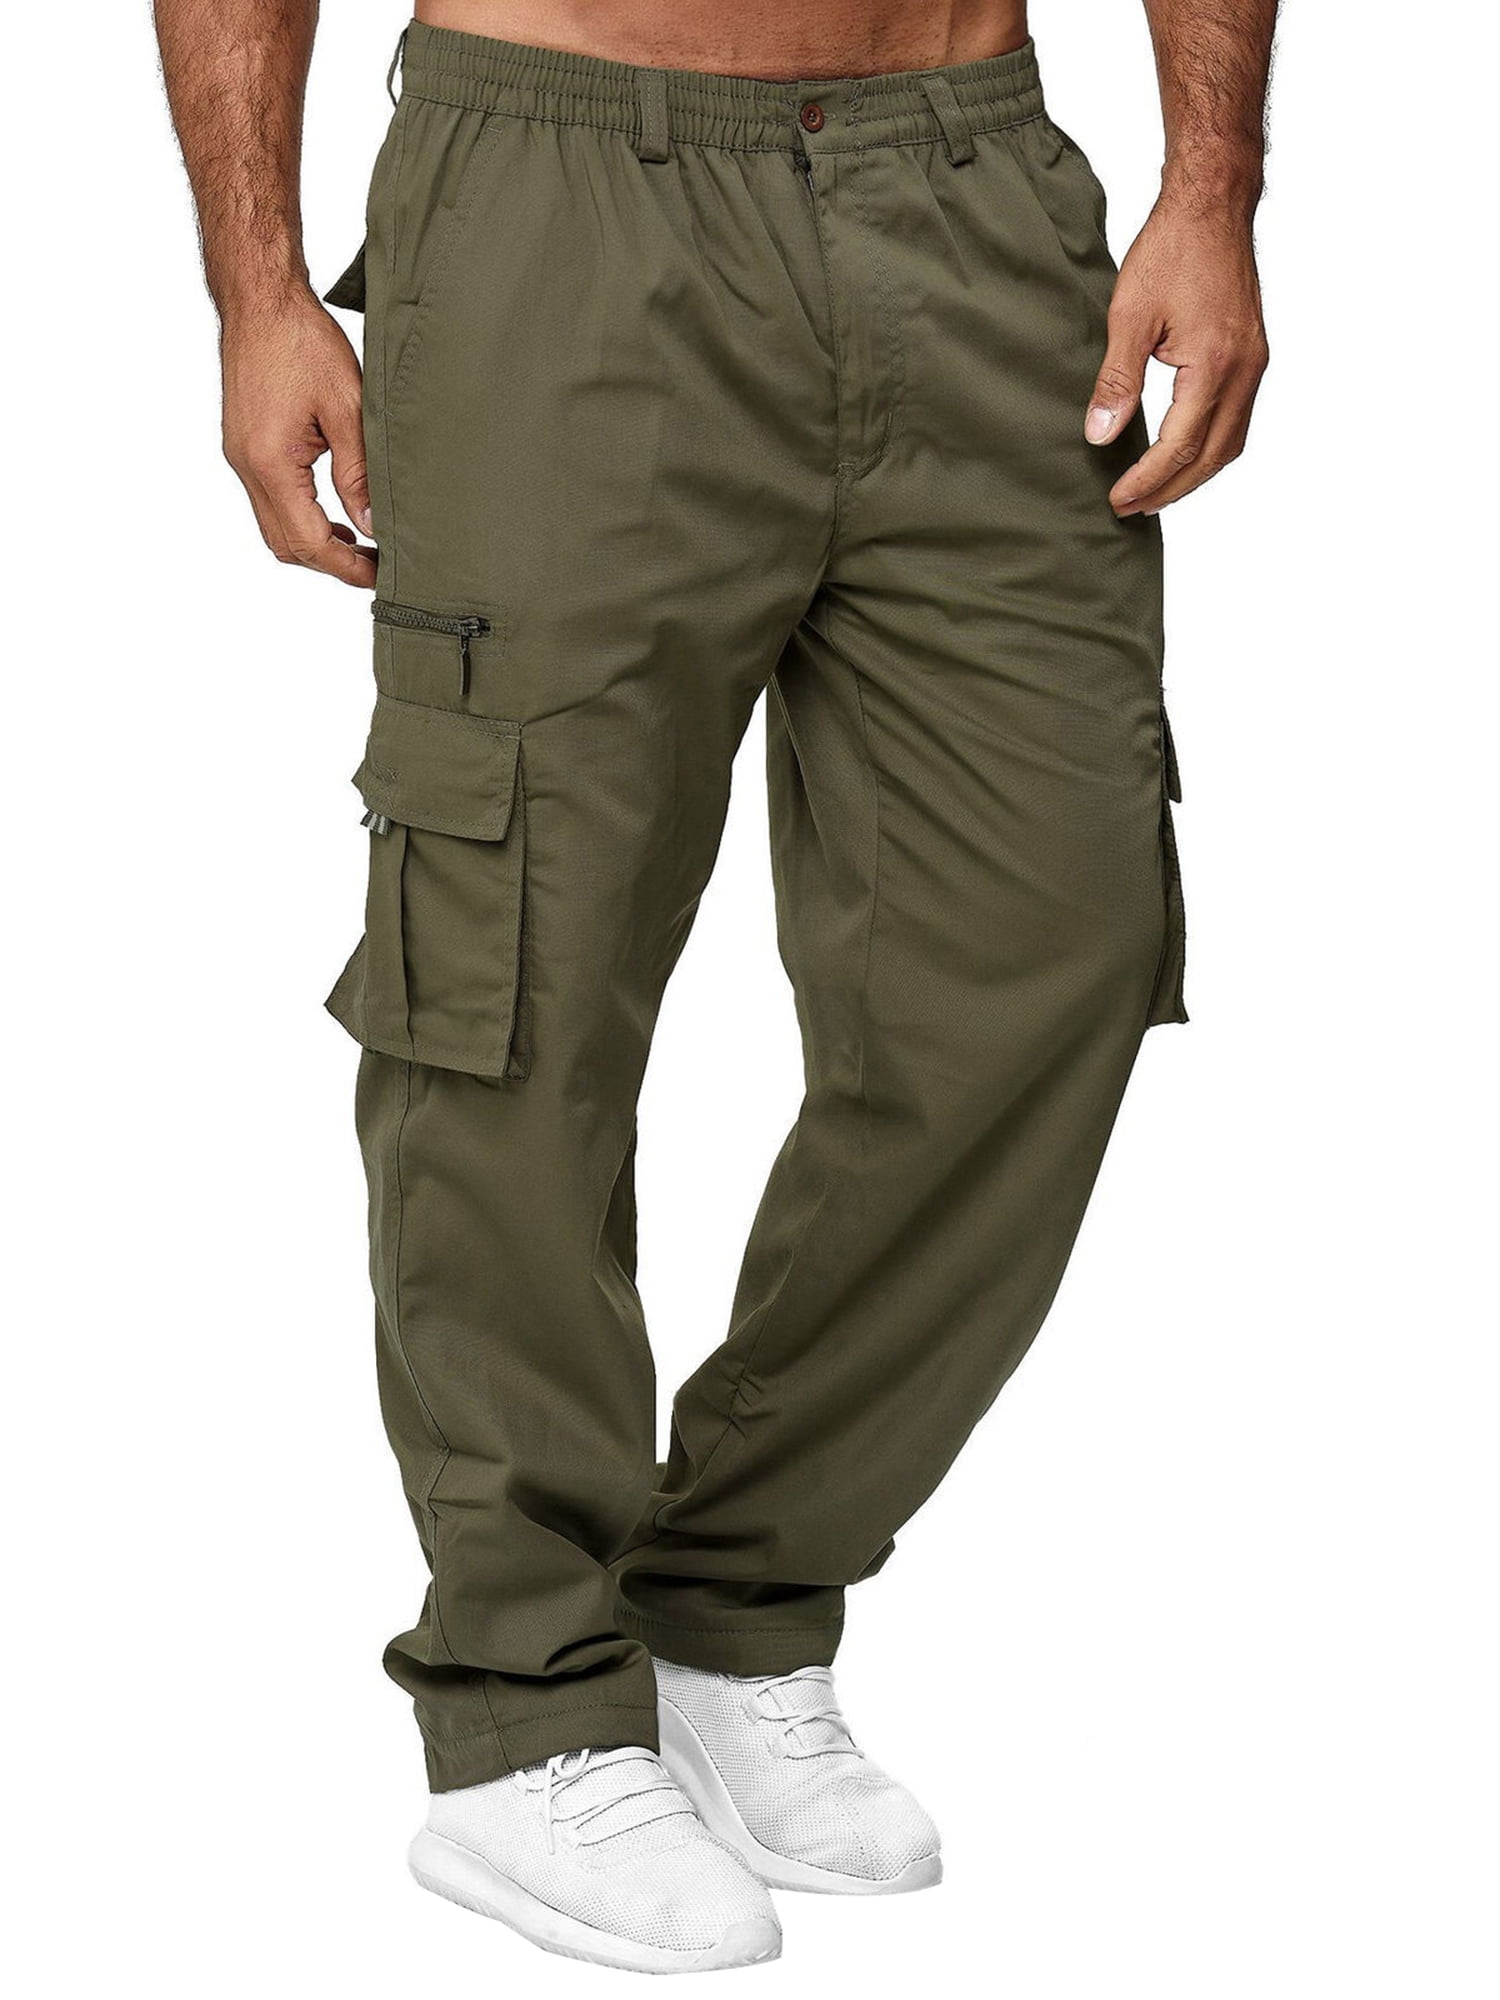 Kupretty Men's Relaxed Fit Cargo Pants Multi-Pockets Work Pants Casual ...